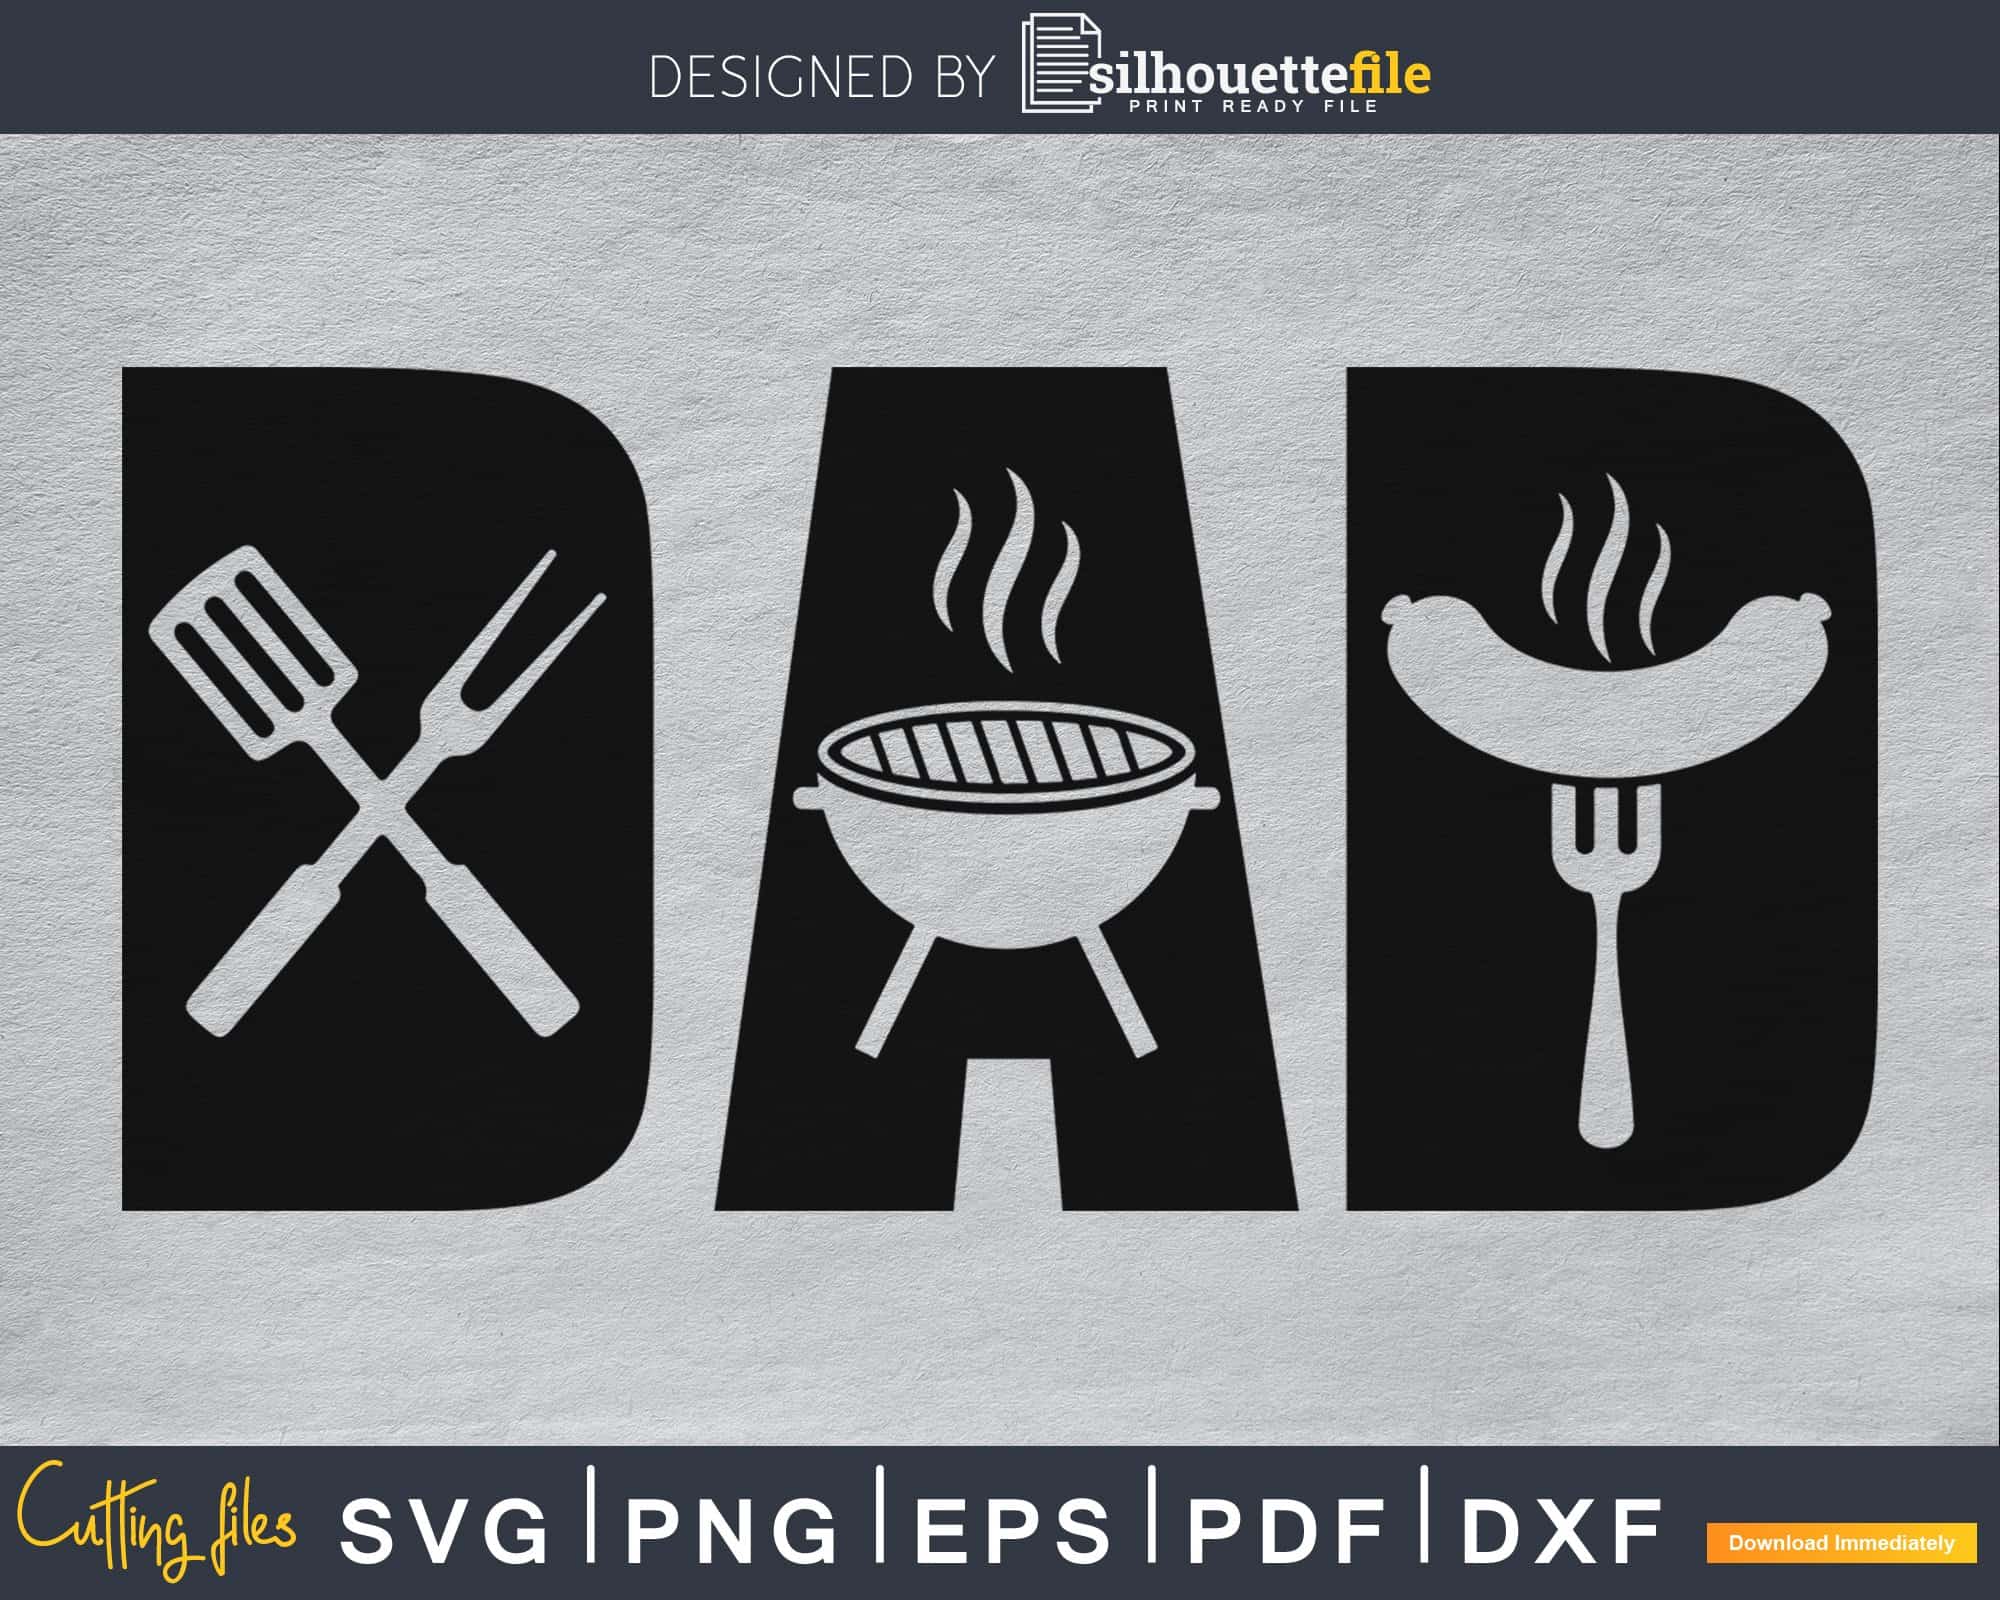 Cook Knife Svg, Kitchen Tool Svg, Chef Logo Svg, Cutting Tool Svg. Vector  Cut File Cricut, Silhouette, Pdf Png Eps Dxf, Decal, Sticker. (Instant  Download) 